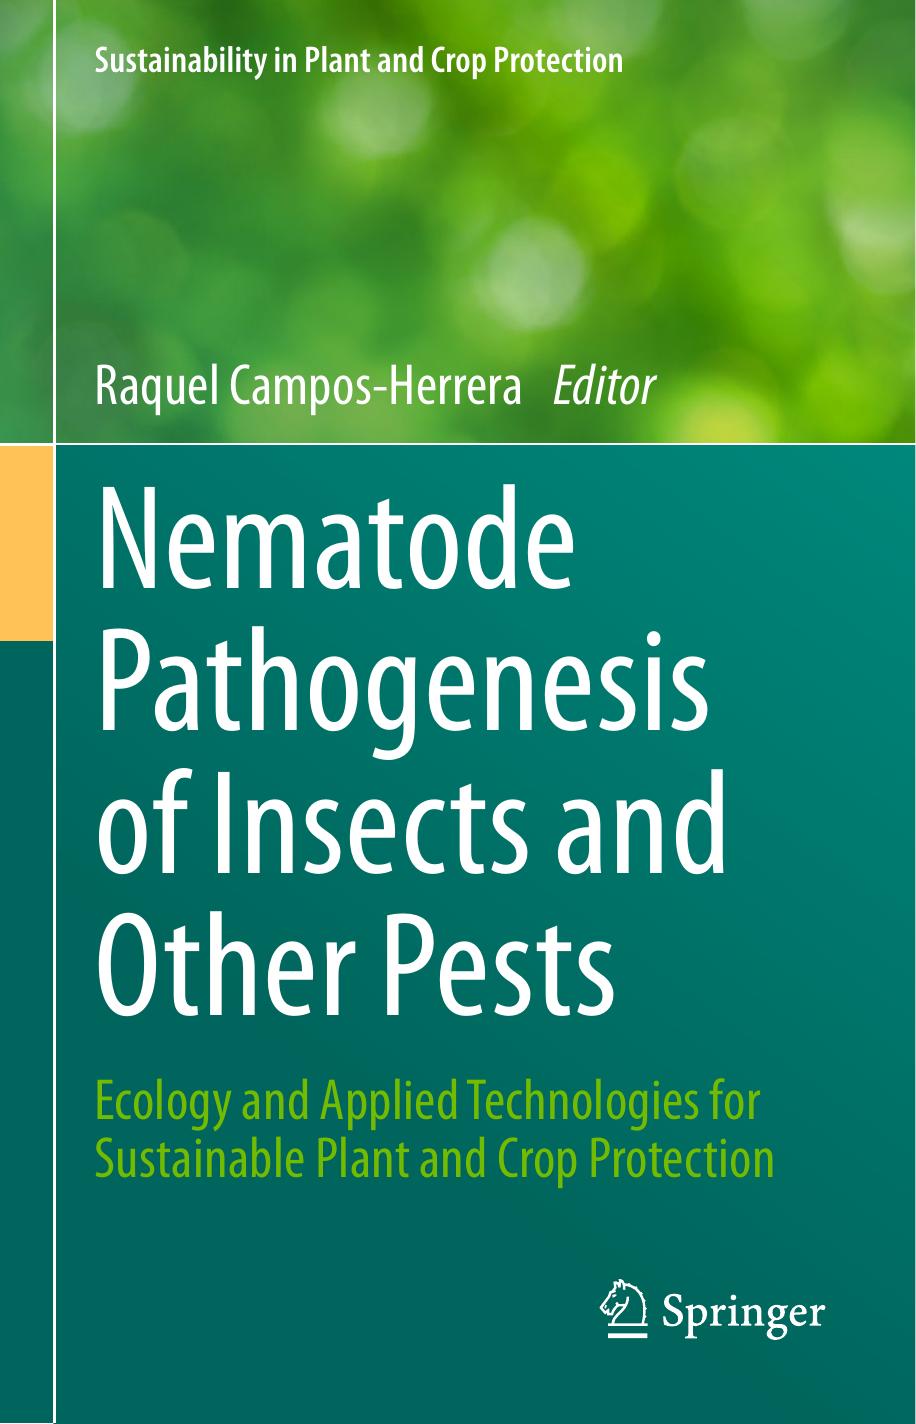 Nematode Pathogenesis of Insects and Other Pests Ecology and Applied, 2015